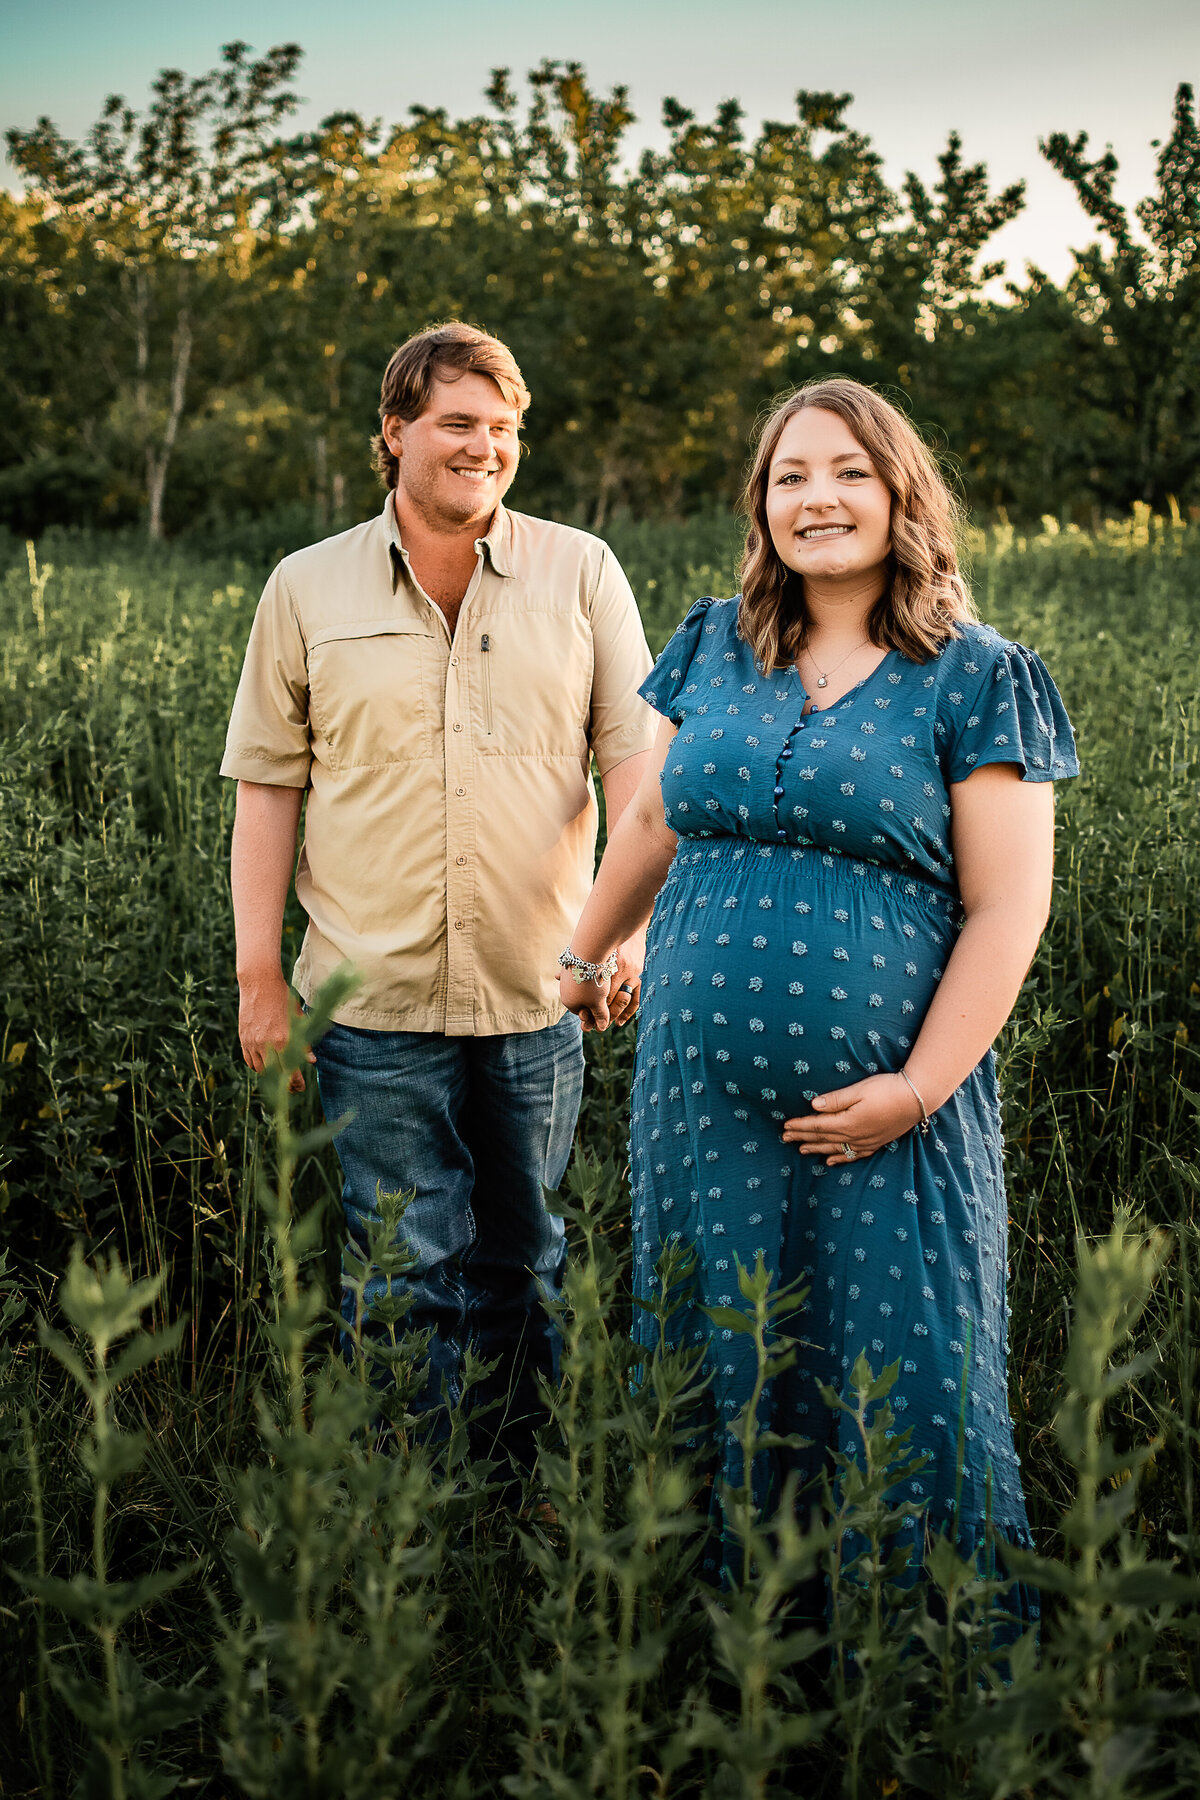 A pregnant wife leads her husband through a field of long grass as he looks at her and smiles.